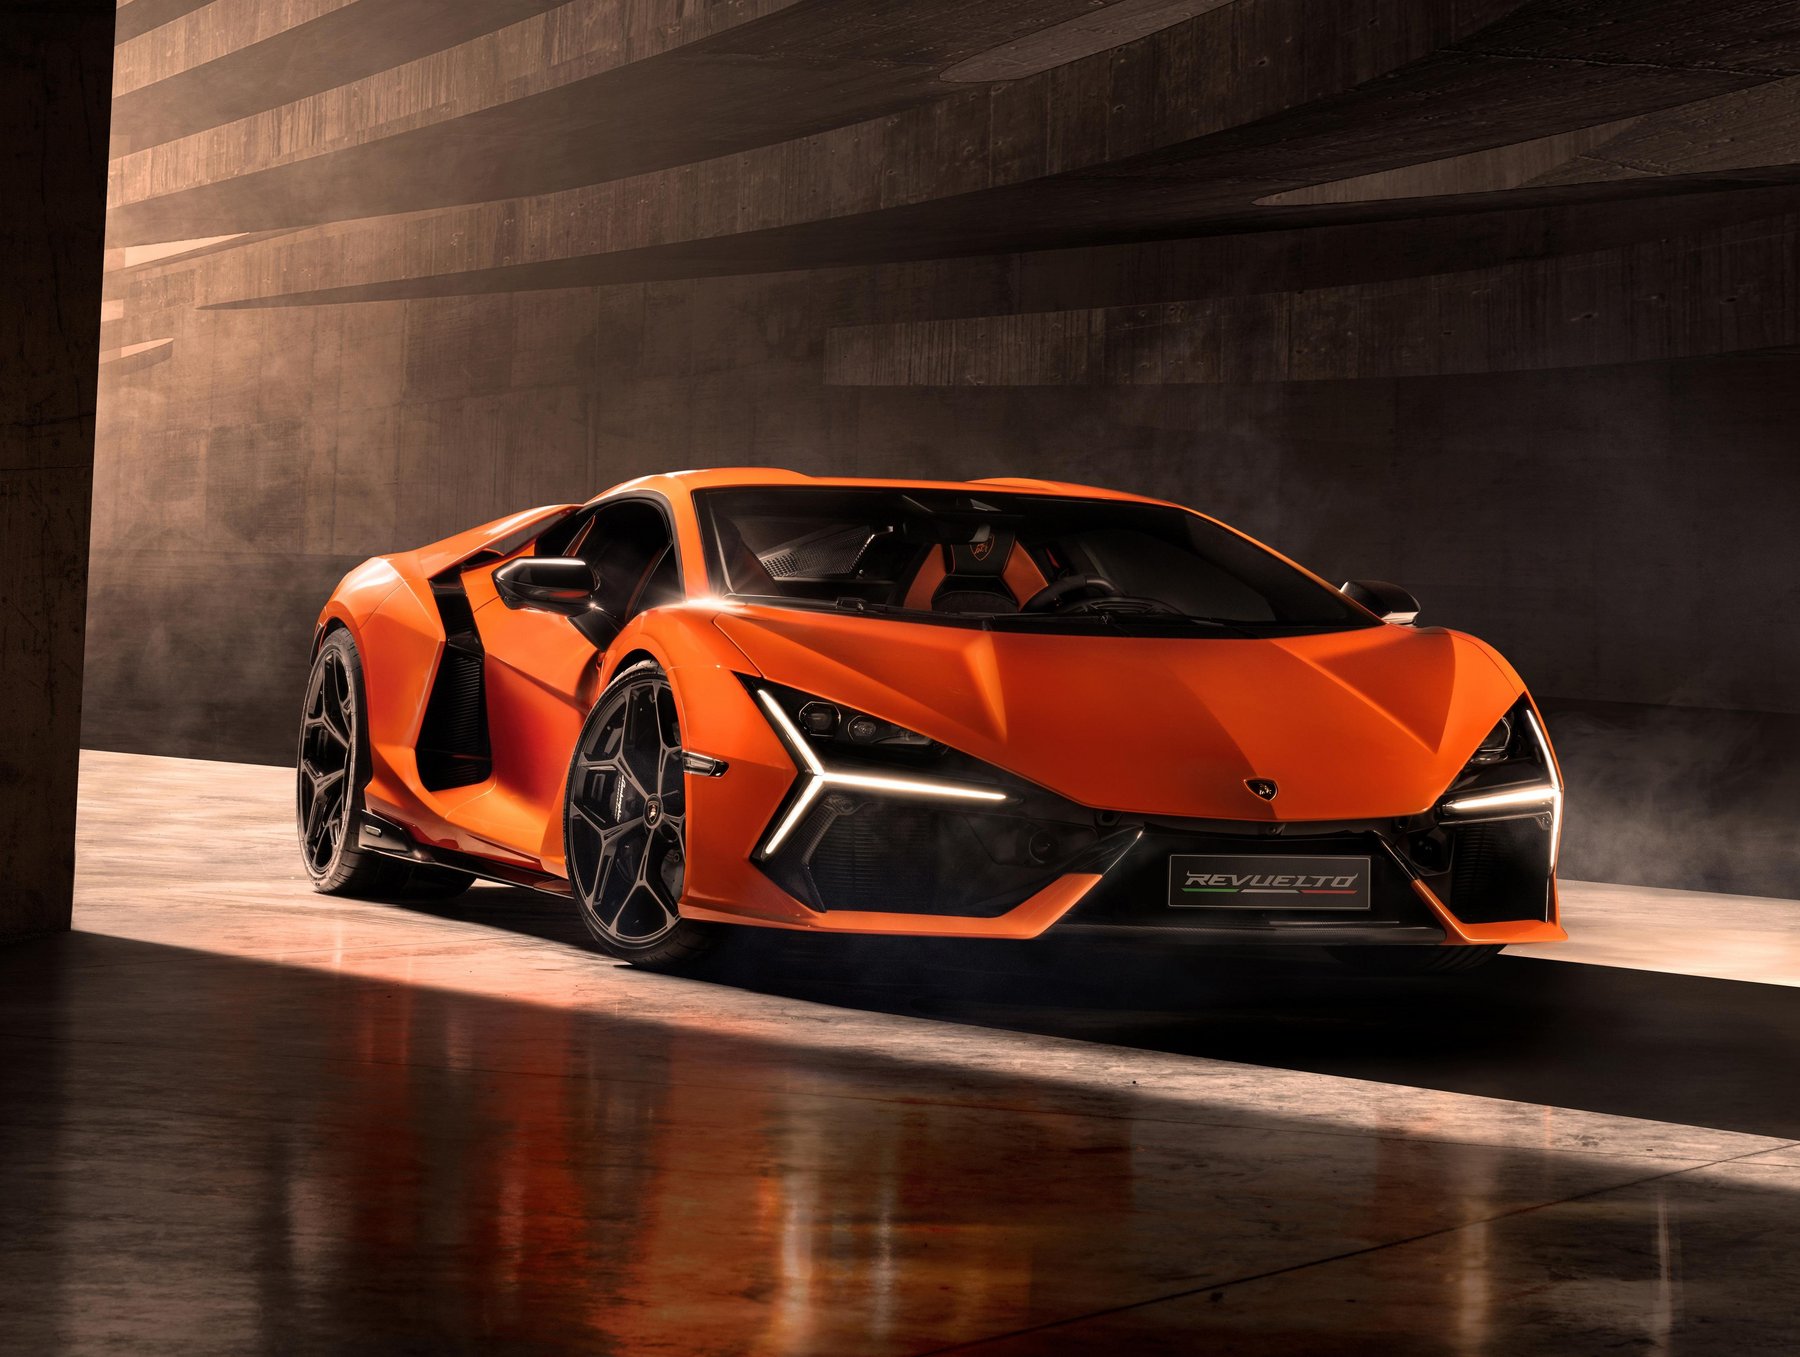 The Electric Shift Lamborghini's Cautious Approach Amidst Industry Turbulence